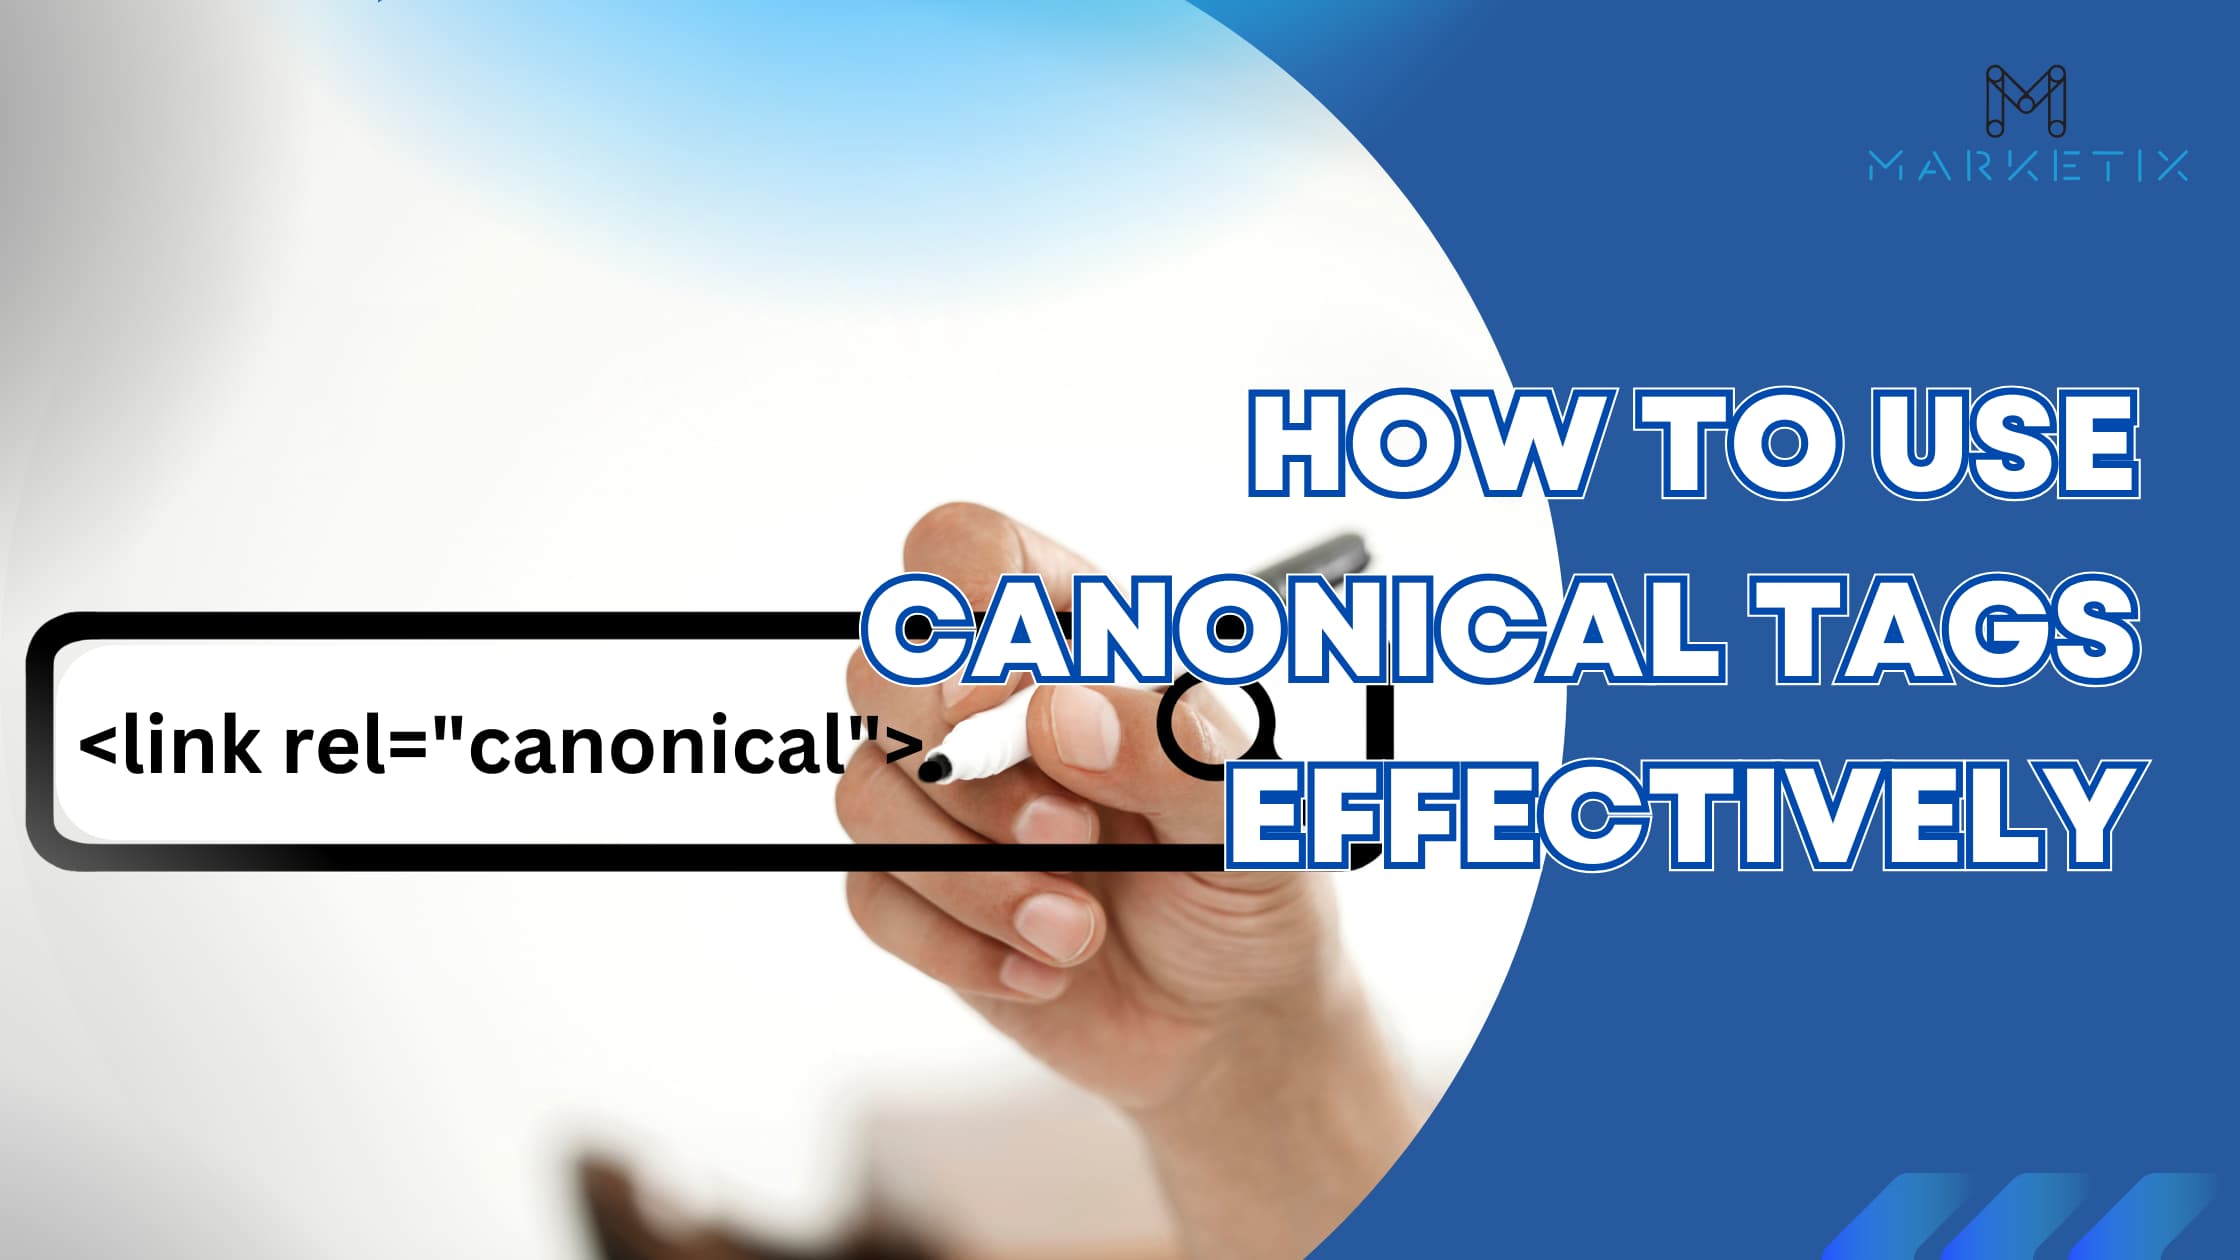 How to Use Canonical Tags Effectively